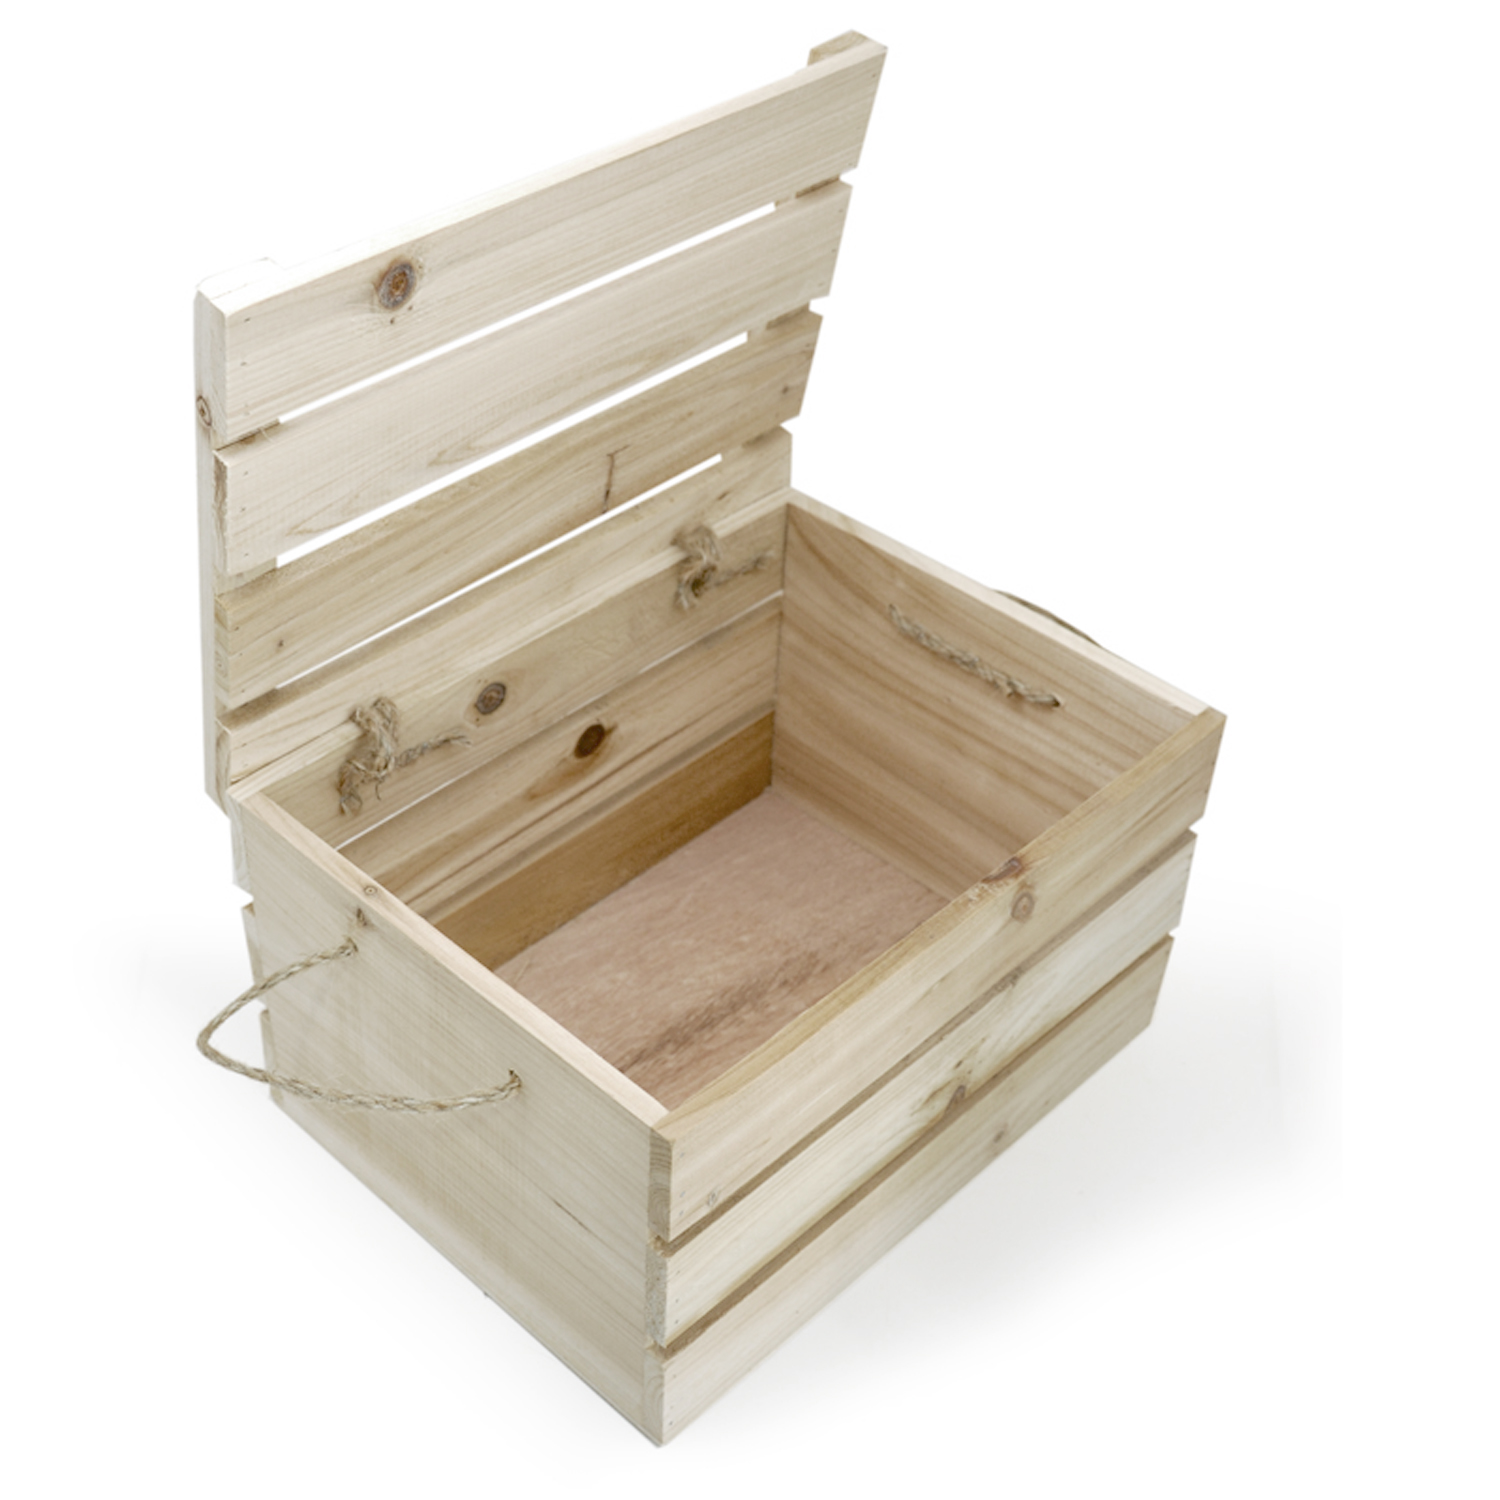 Natural Wooden Crate Storage Box with Lid - Medium 11in